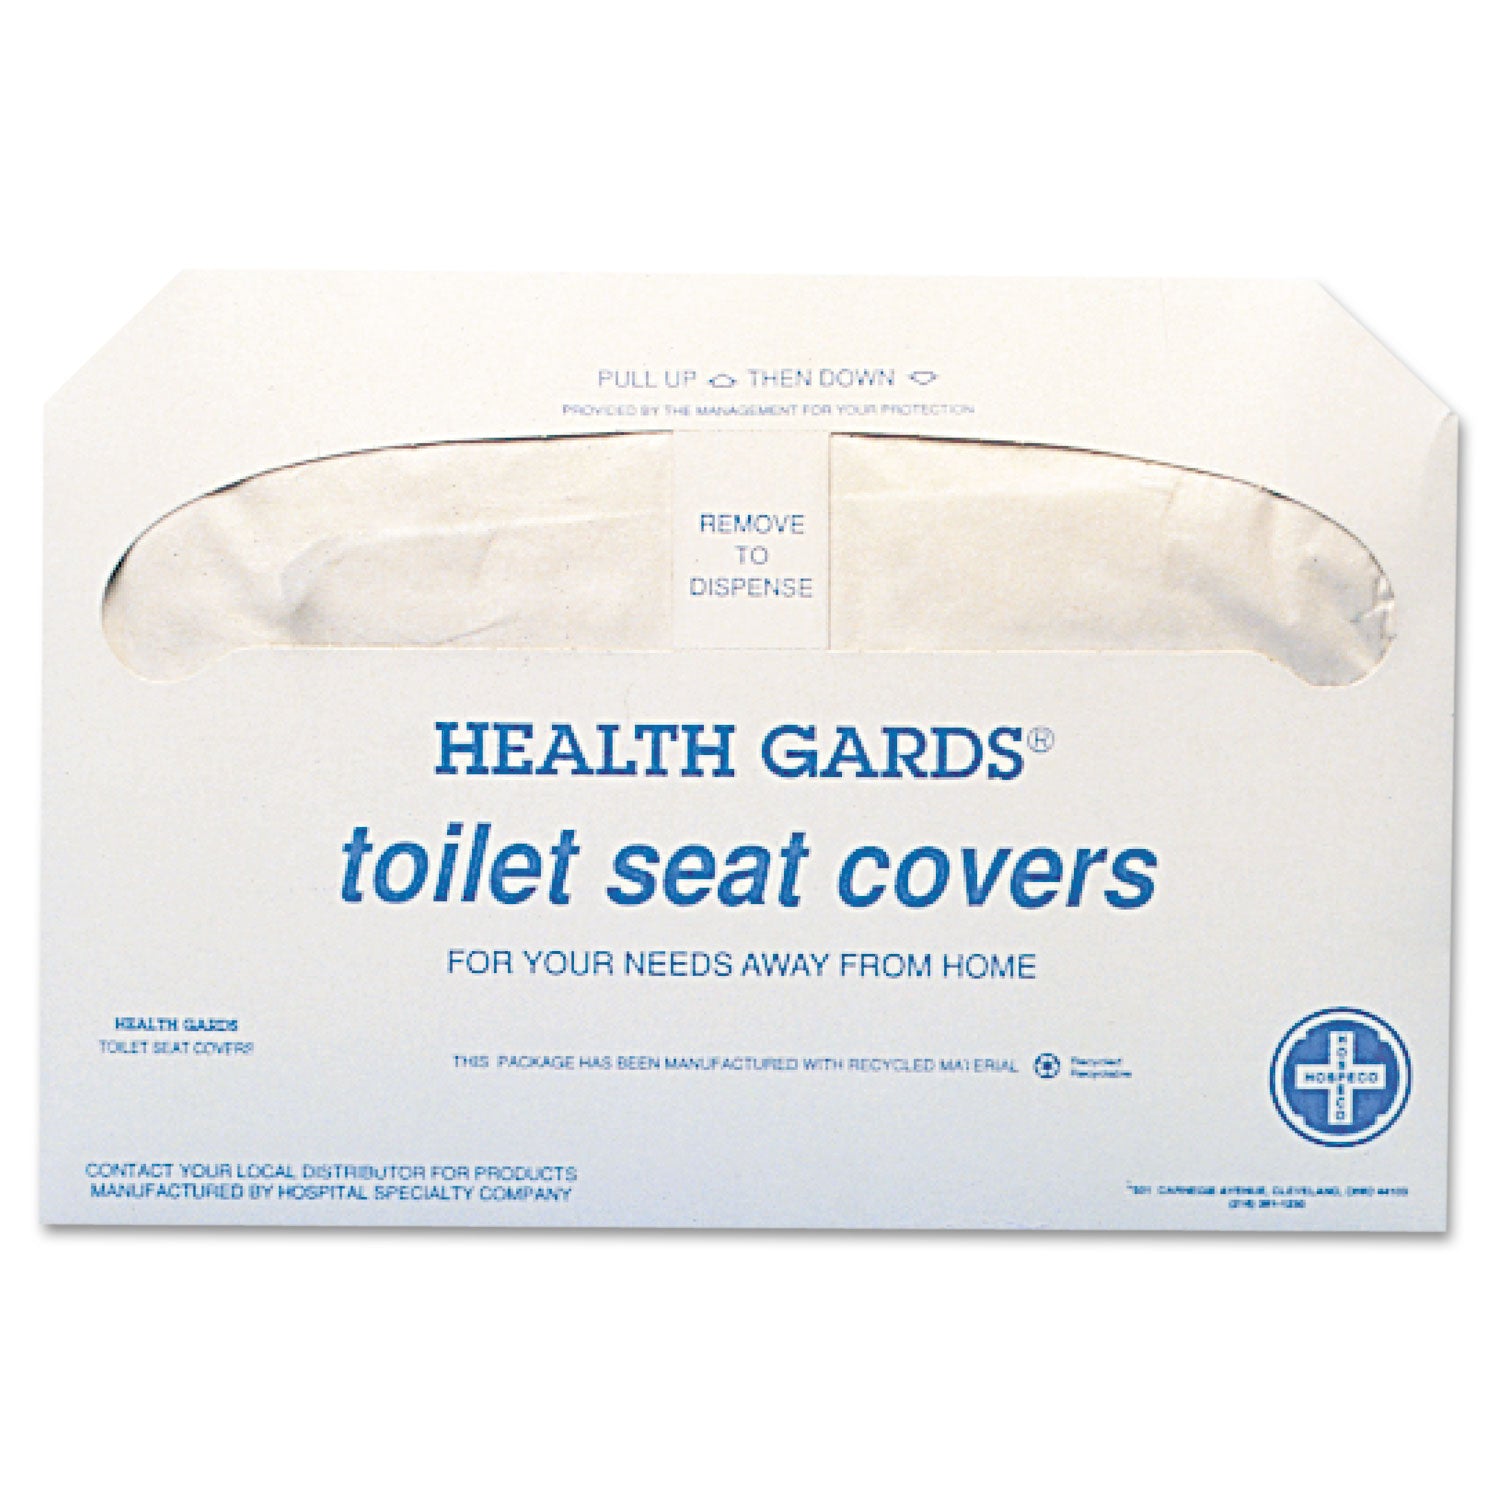 Health Gards Toilet Seat Covers, 14.25 x 16.5, White, 250 Covers/Pack, 20 Packs/Carton - 